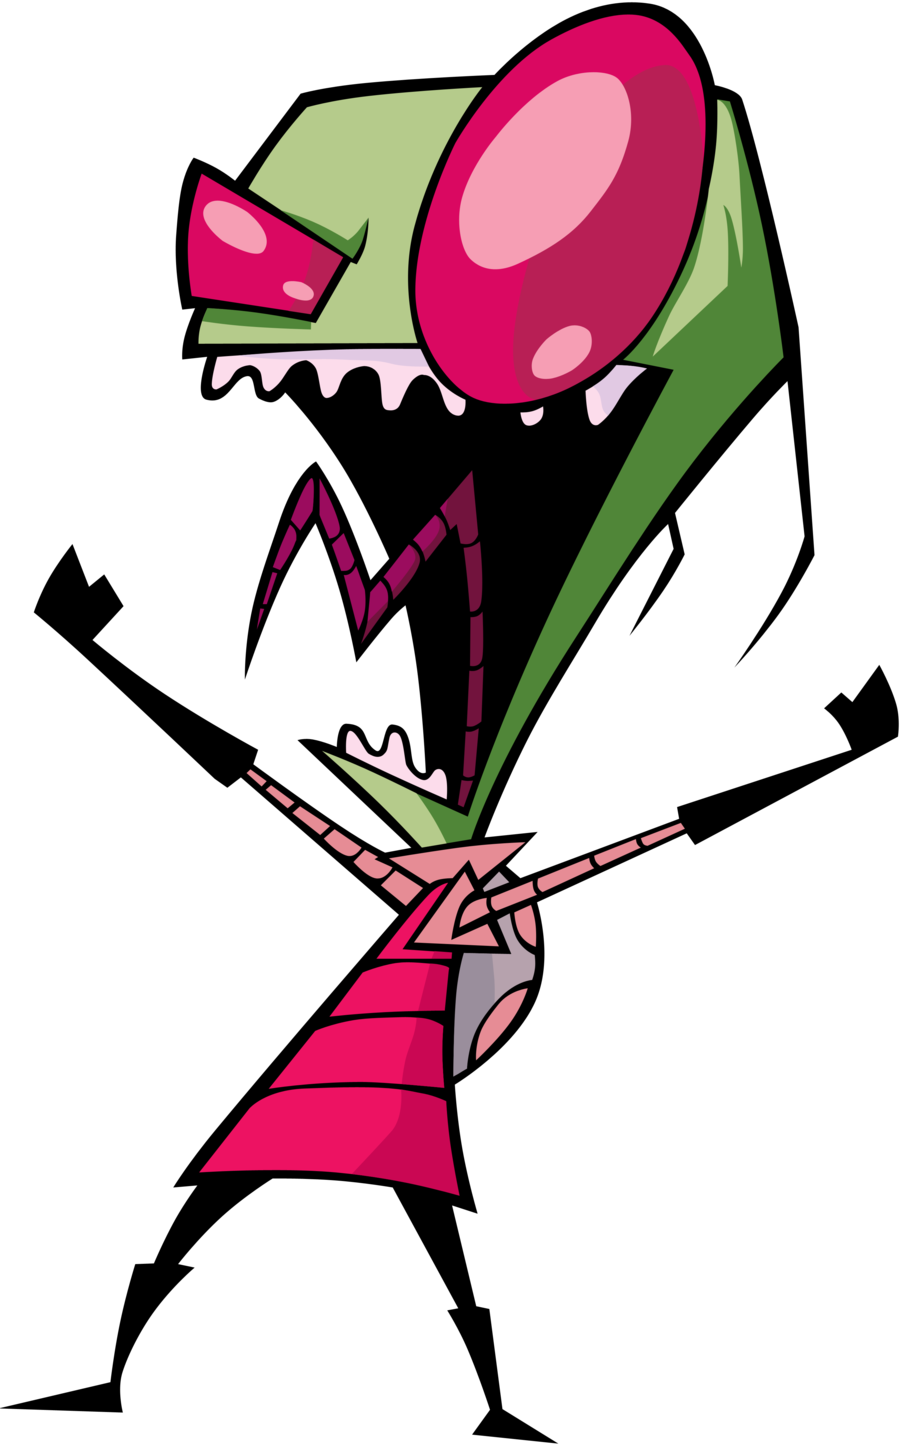 Aggregate cognizance invader zim. Yelling clipart manner